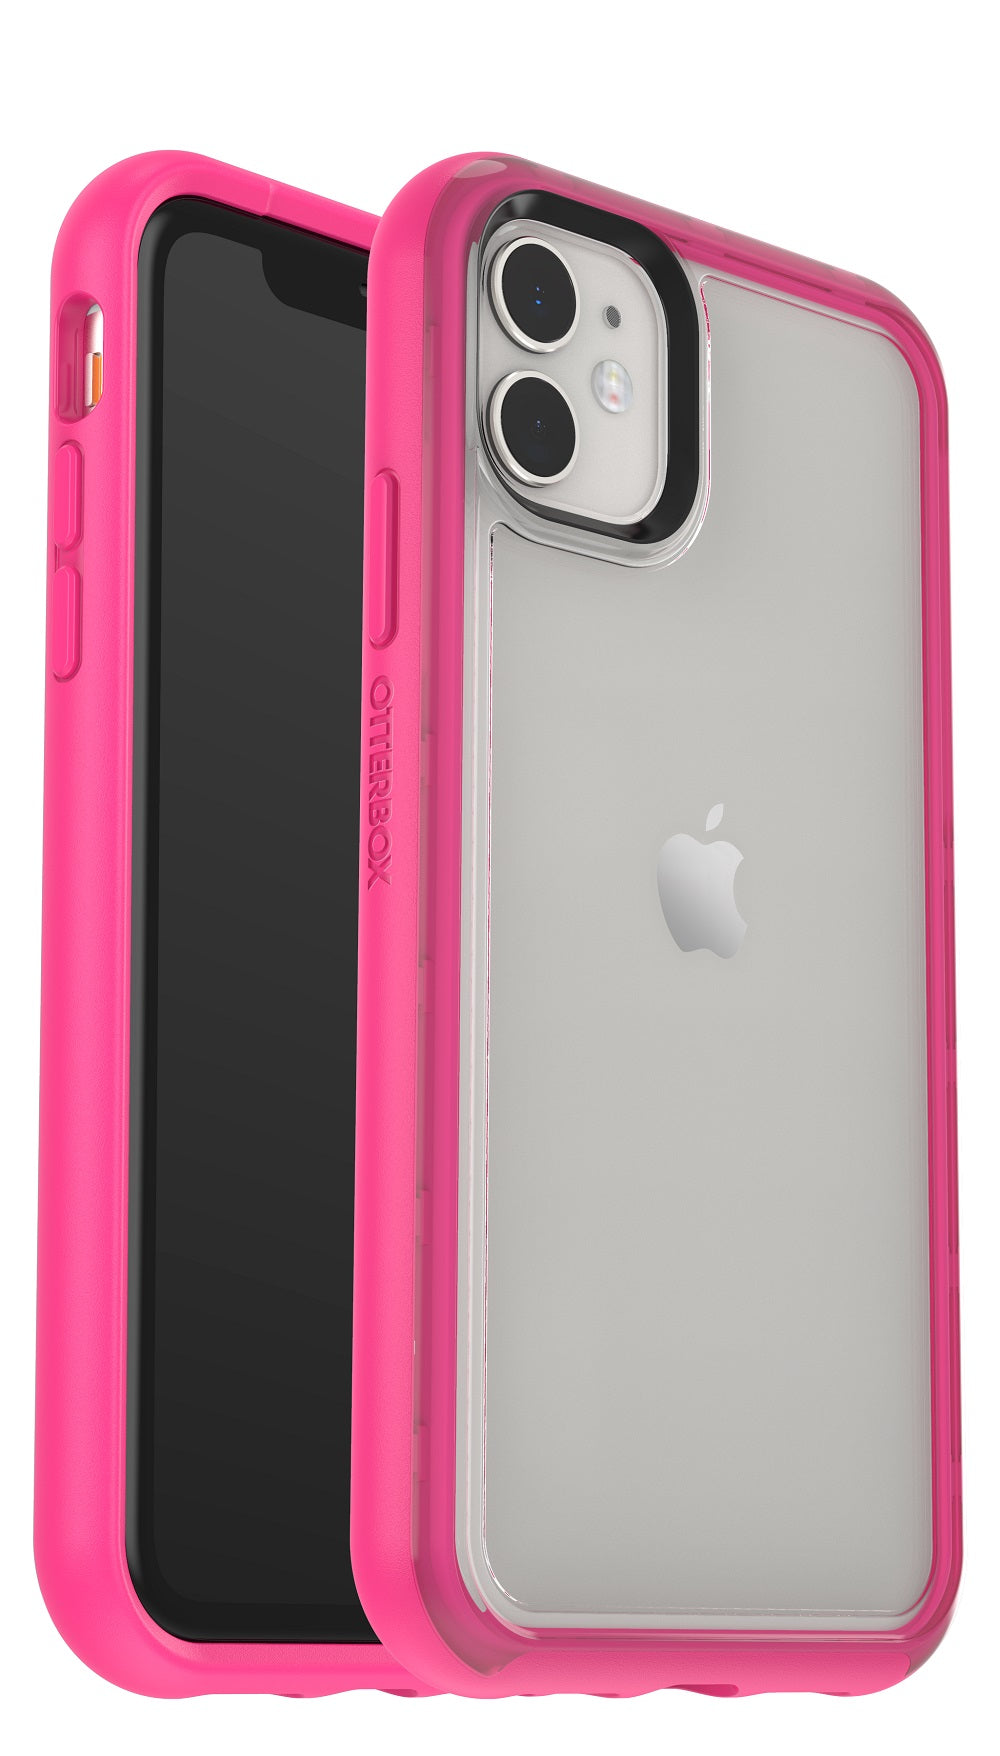 OtterBox Clear Protective Case for Apple iPhone 11 - Love Potion Pink (New)